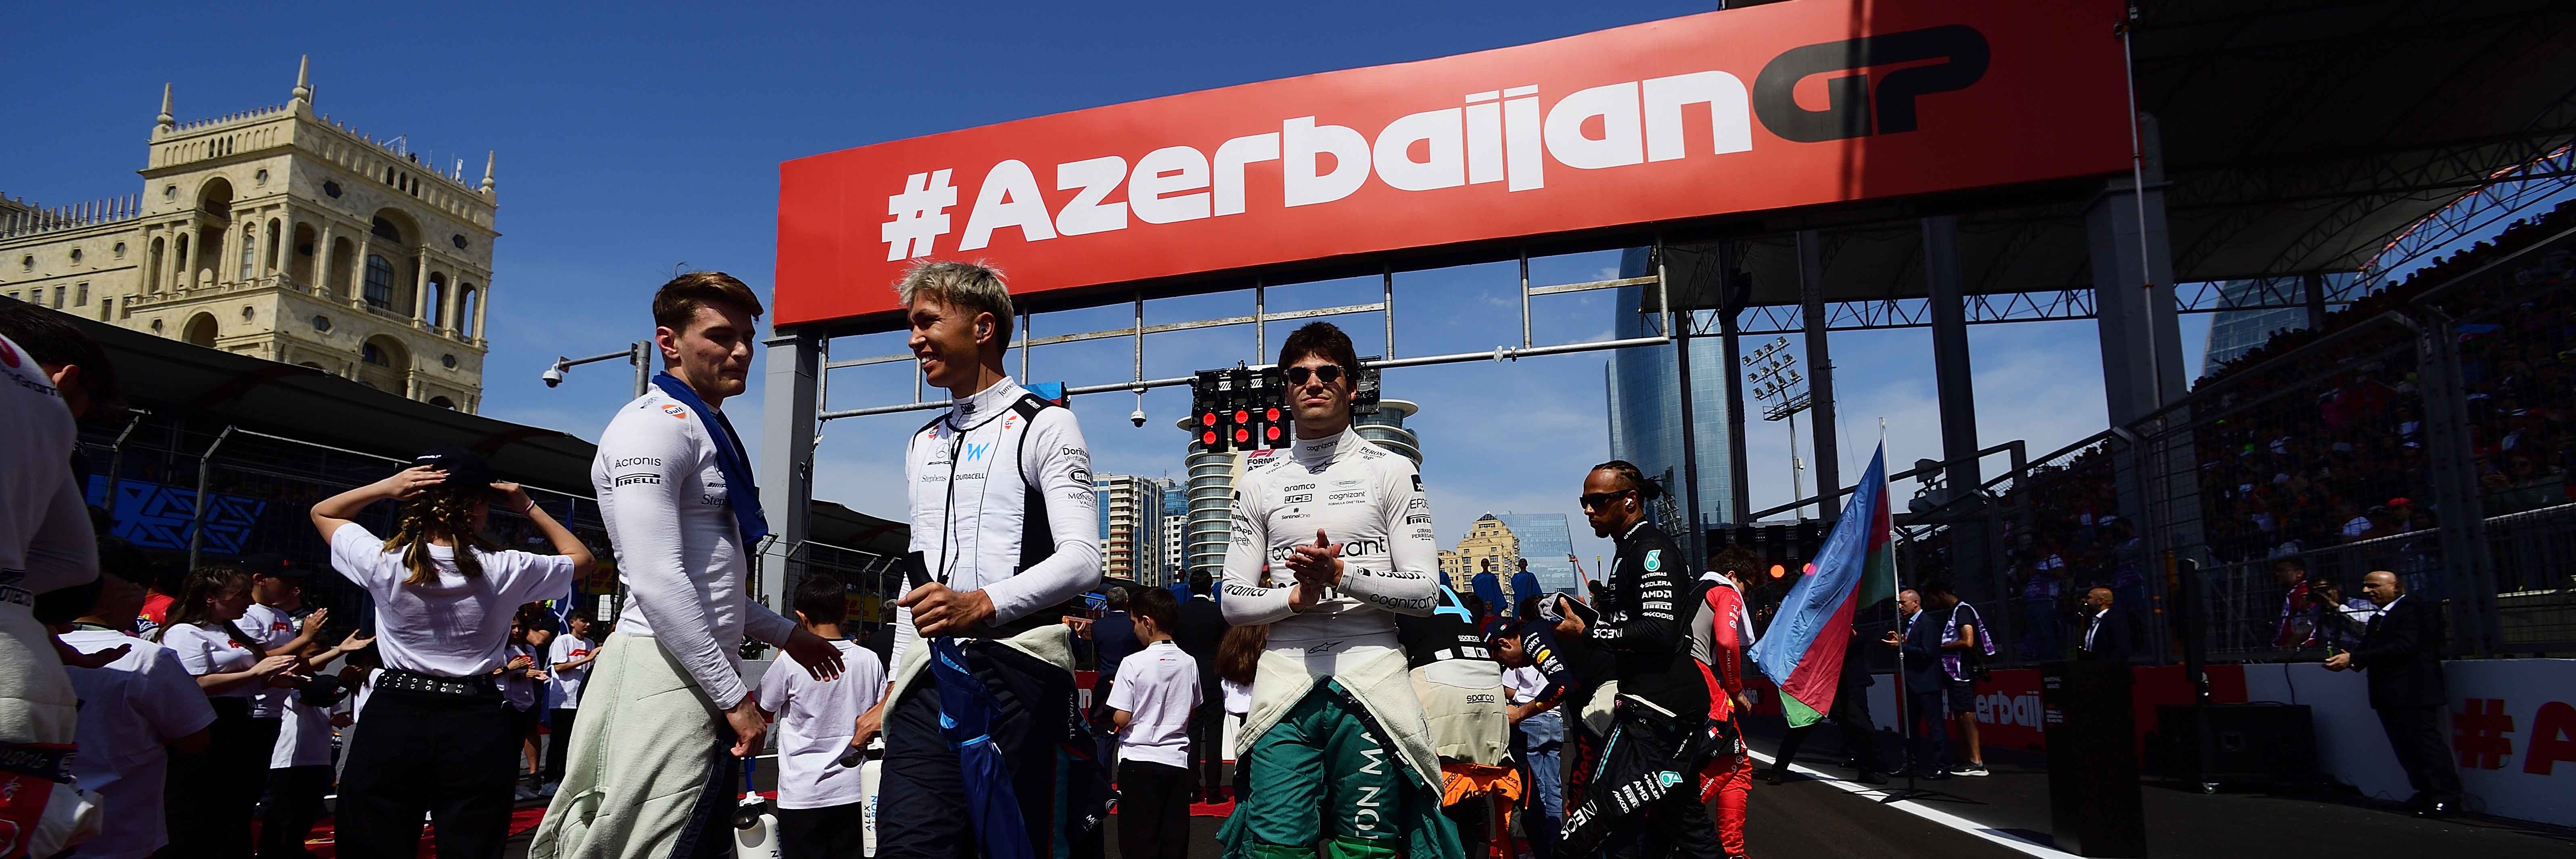 Williams F1 drivers Alexnader Albon and Logan Sargeant on the grid for the Azerbaijan Grand Prix